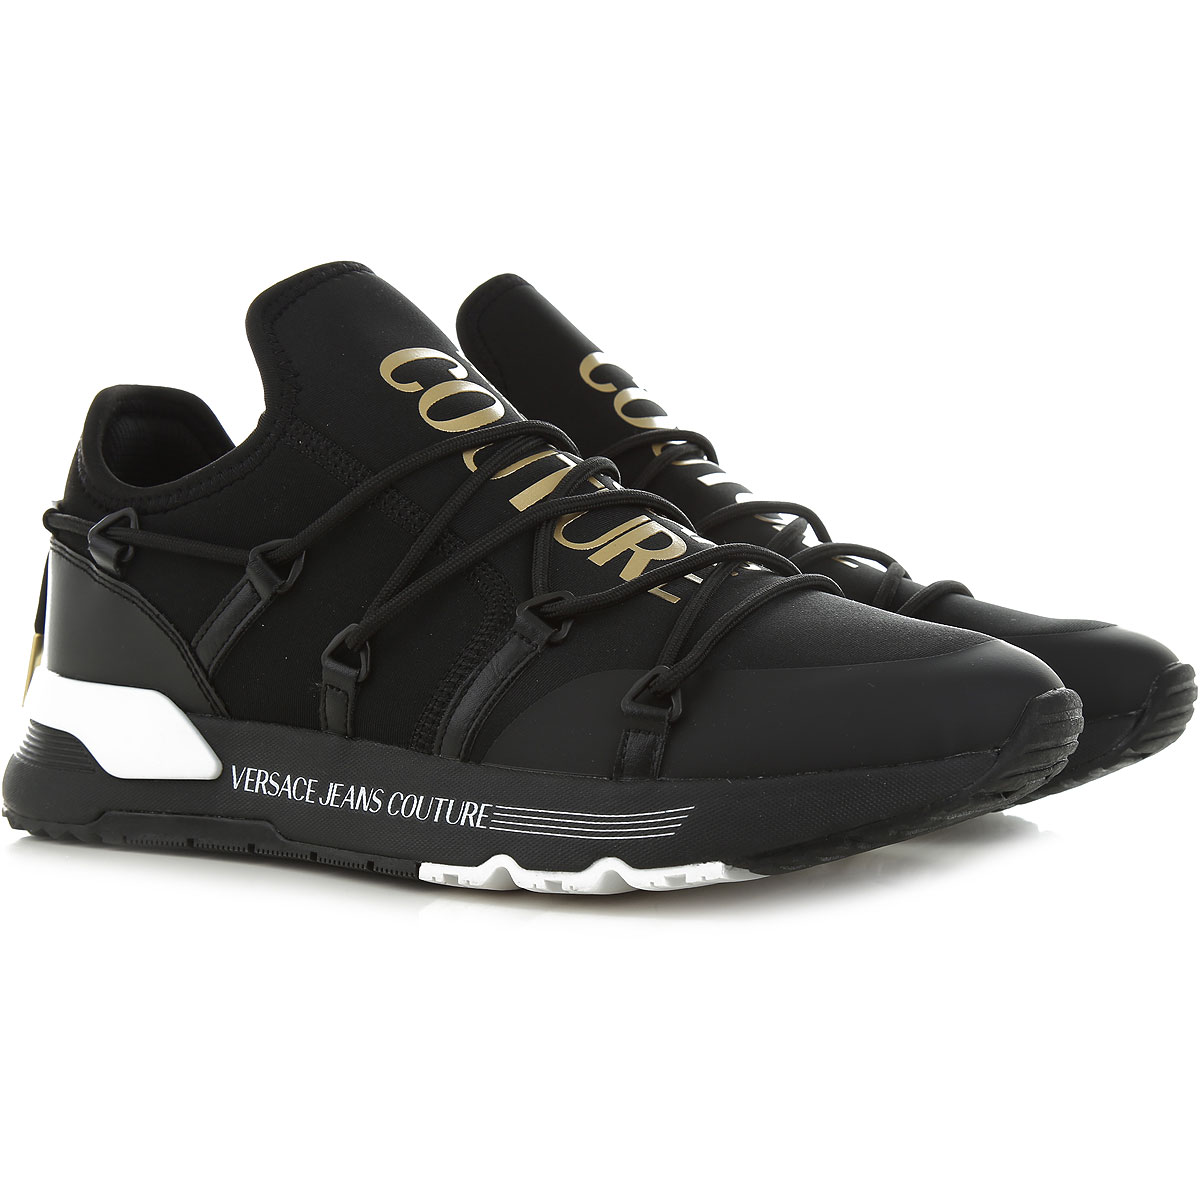 Mens Shoes Versace Jeans Couture , Style code: 74ya3sa6-zs447-g89